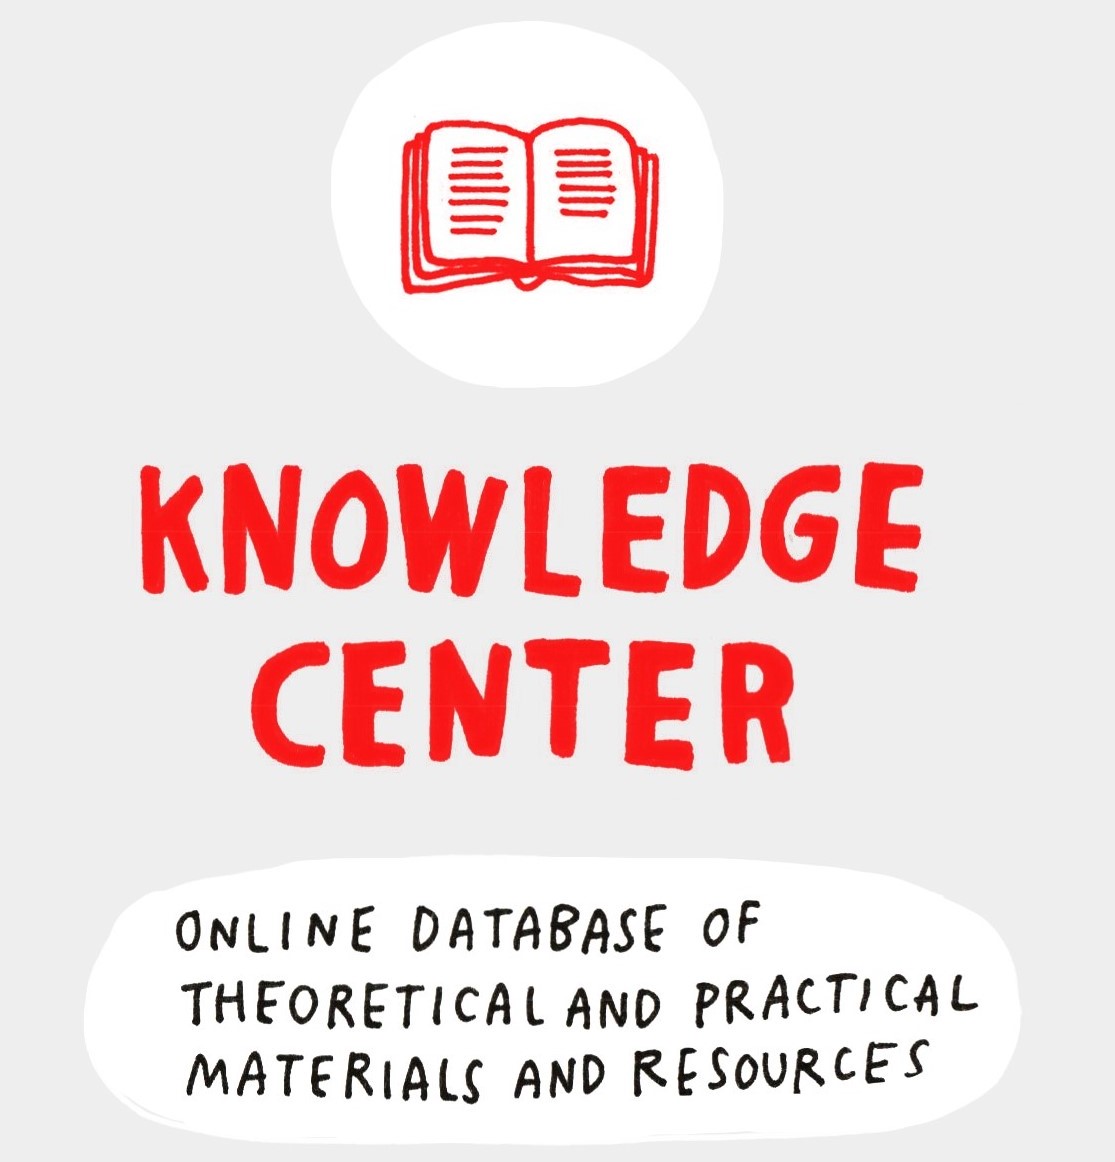 Knowledge Center: Online database of theoretical and practical materials and resources